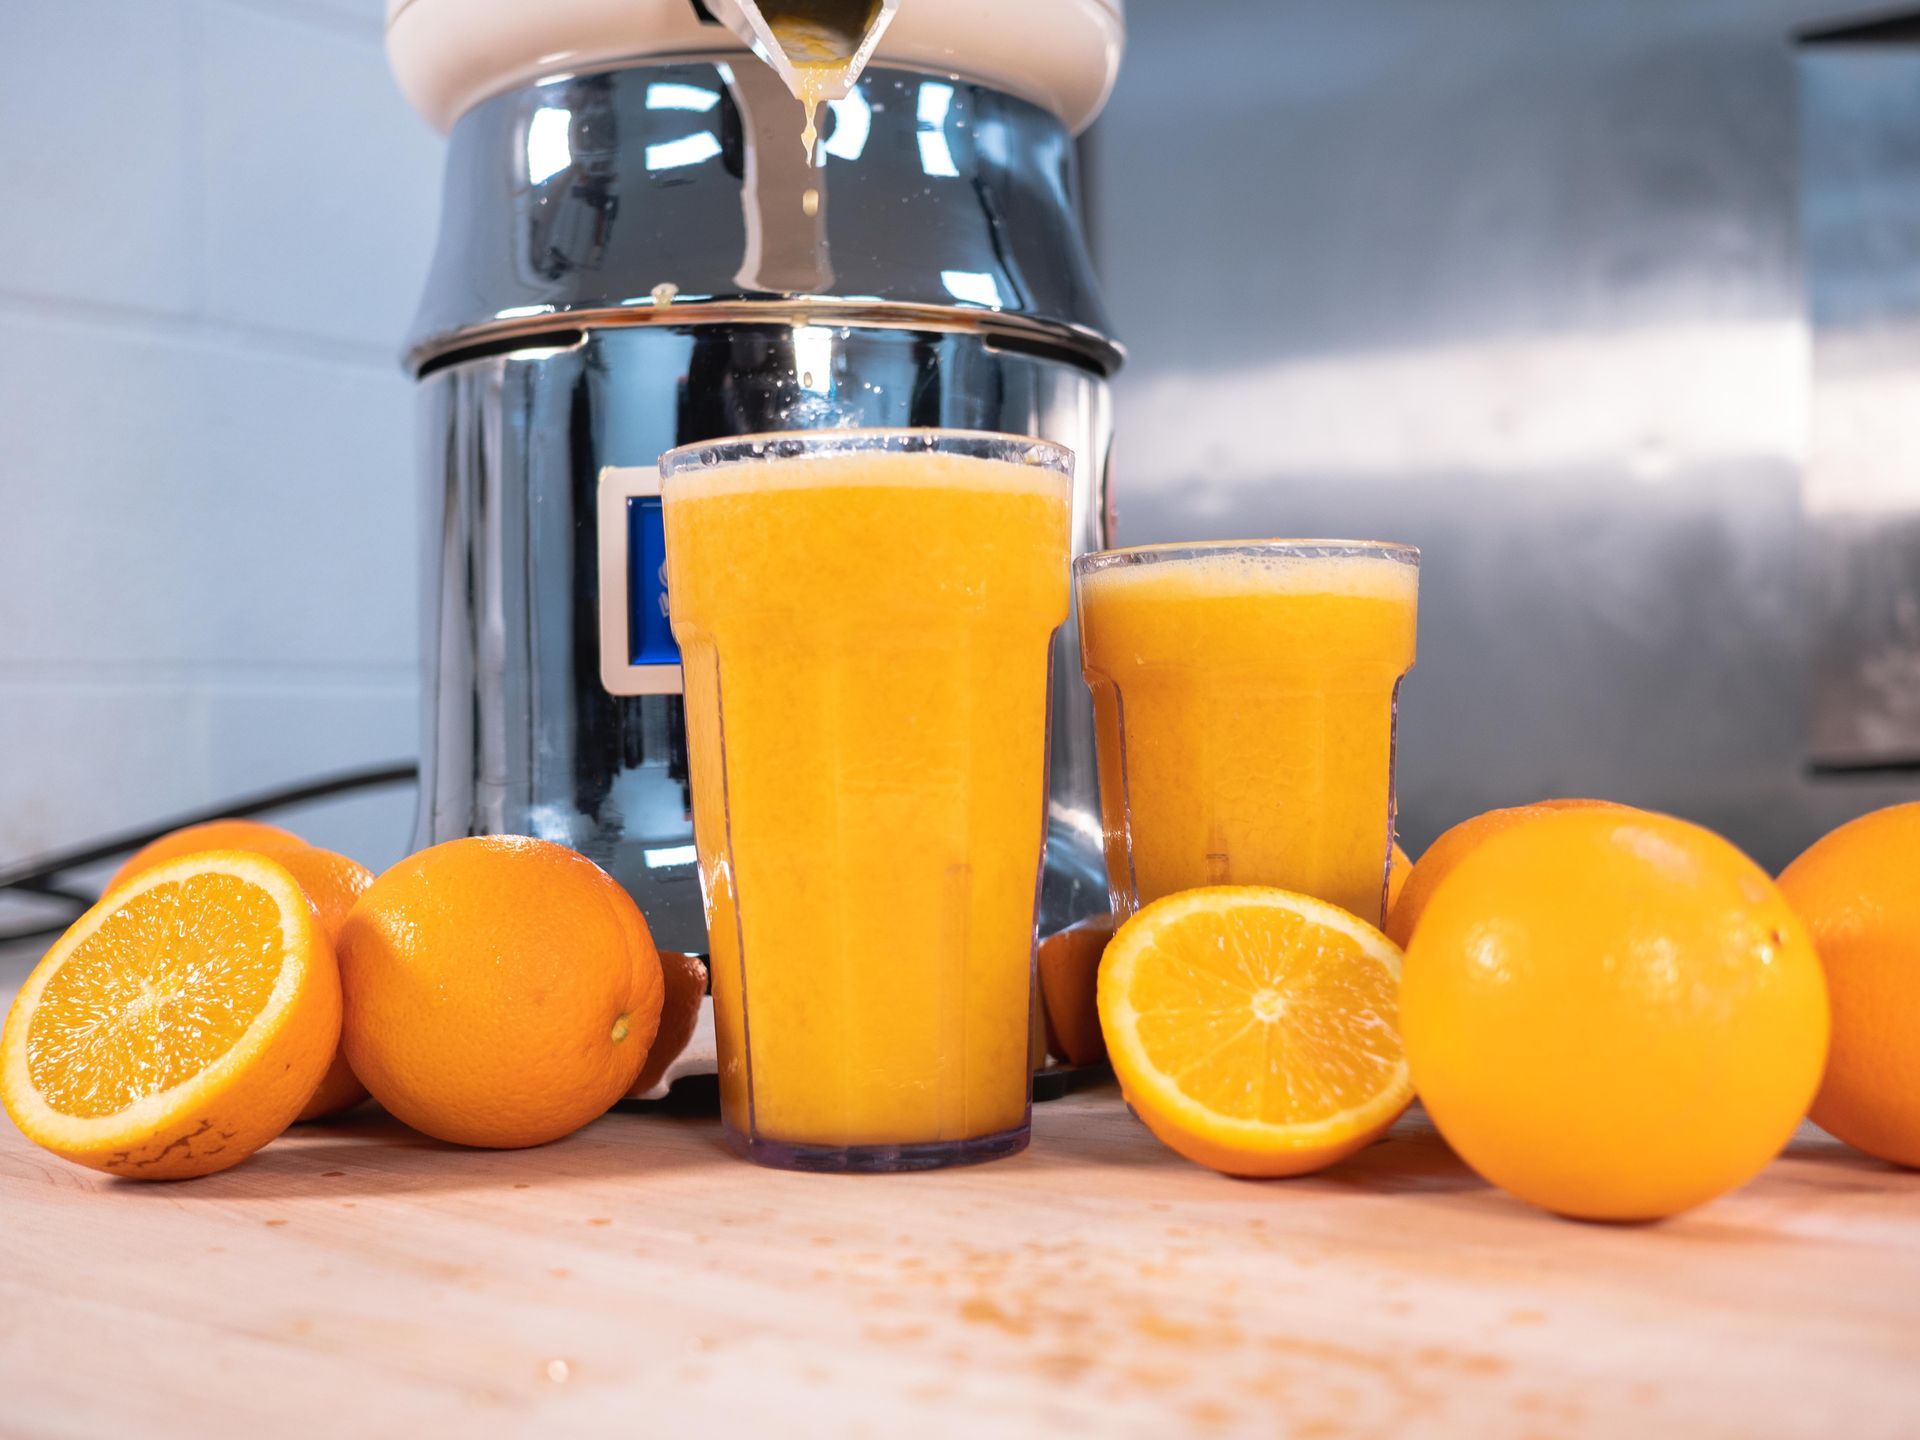 A glass of orange juice is being poured into a glass next to oranges.